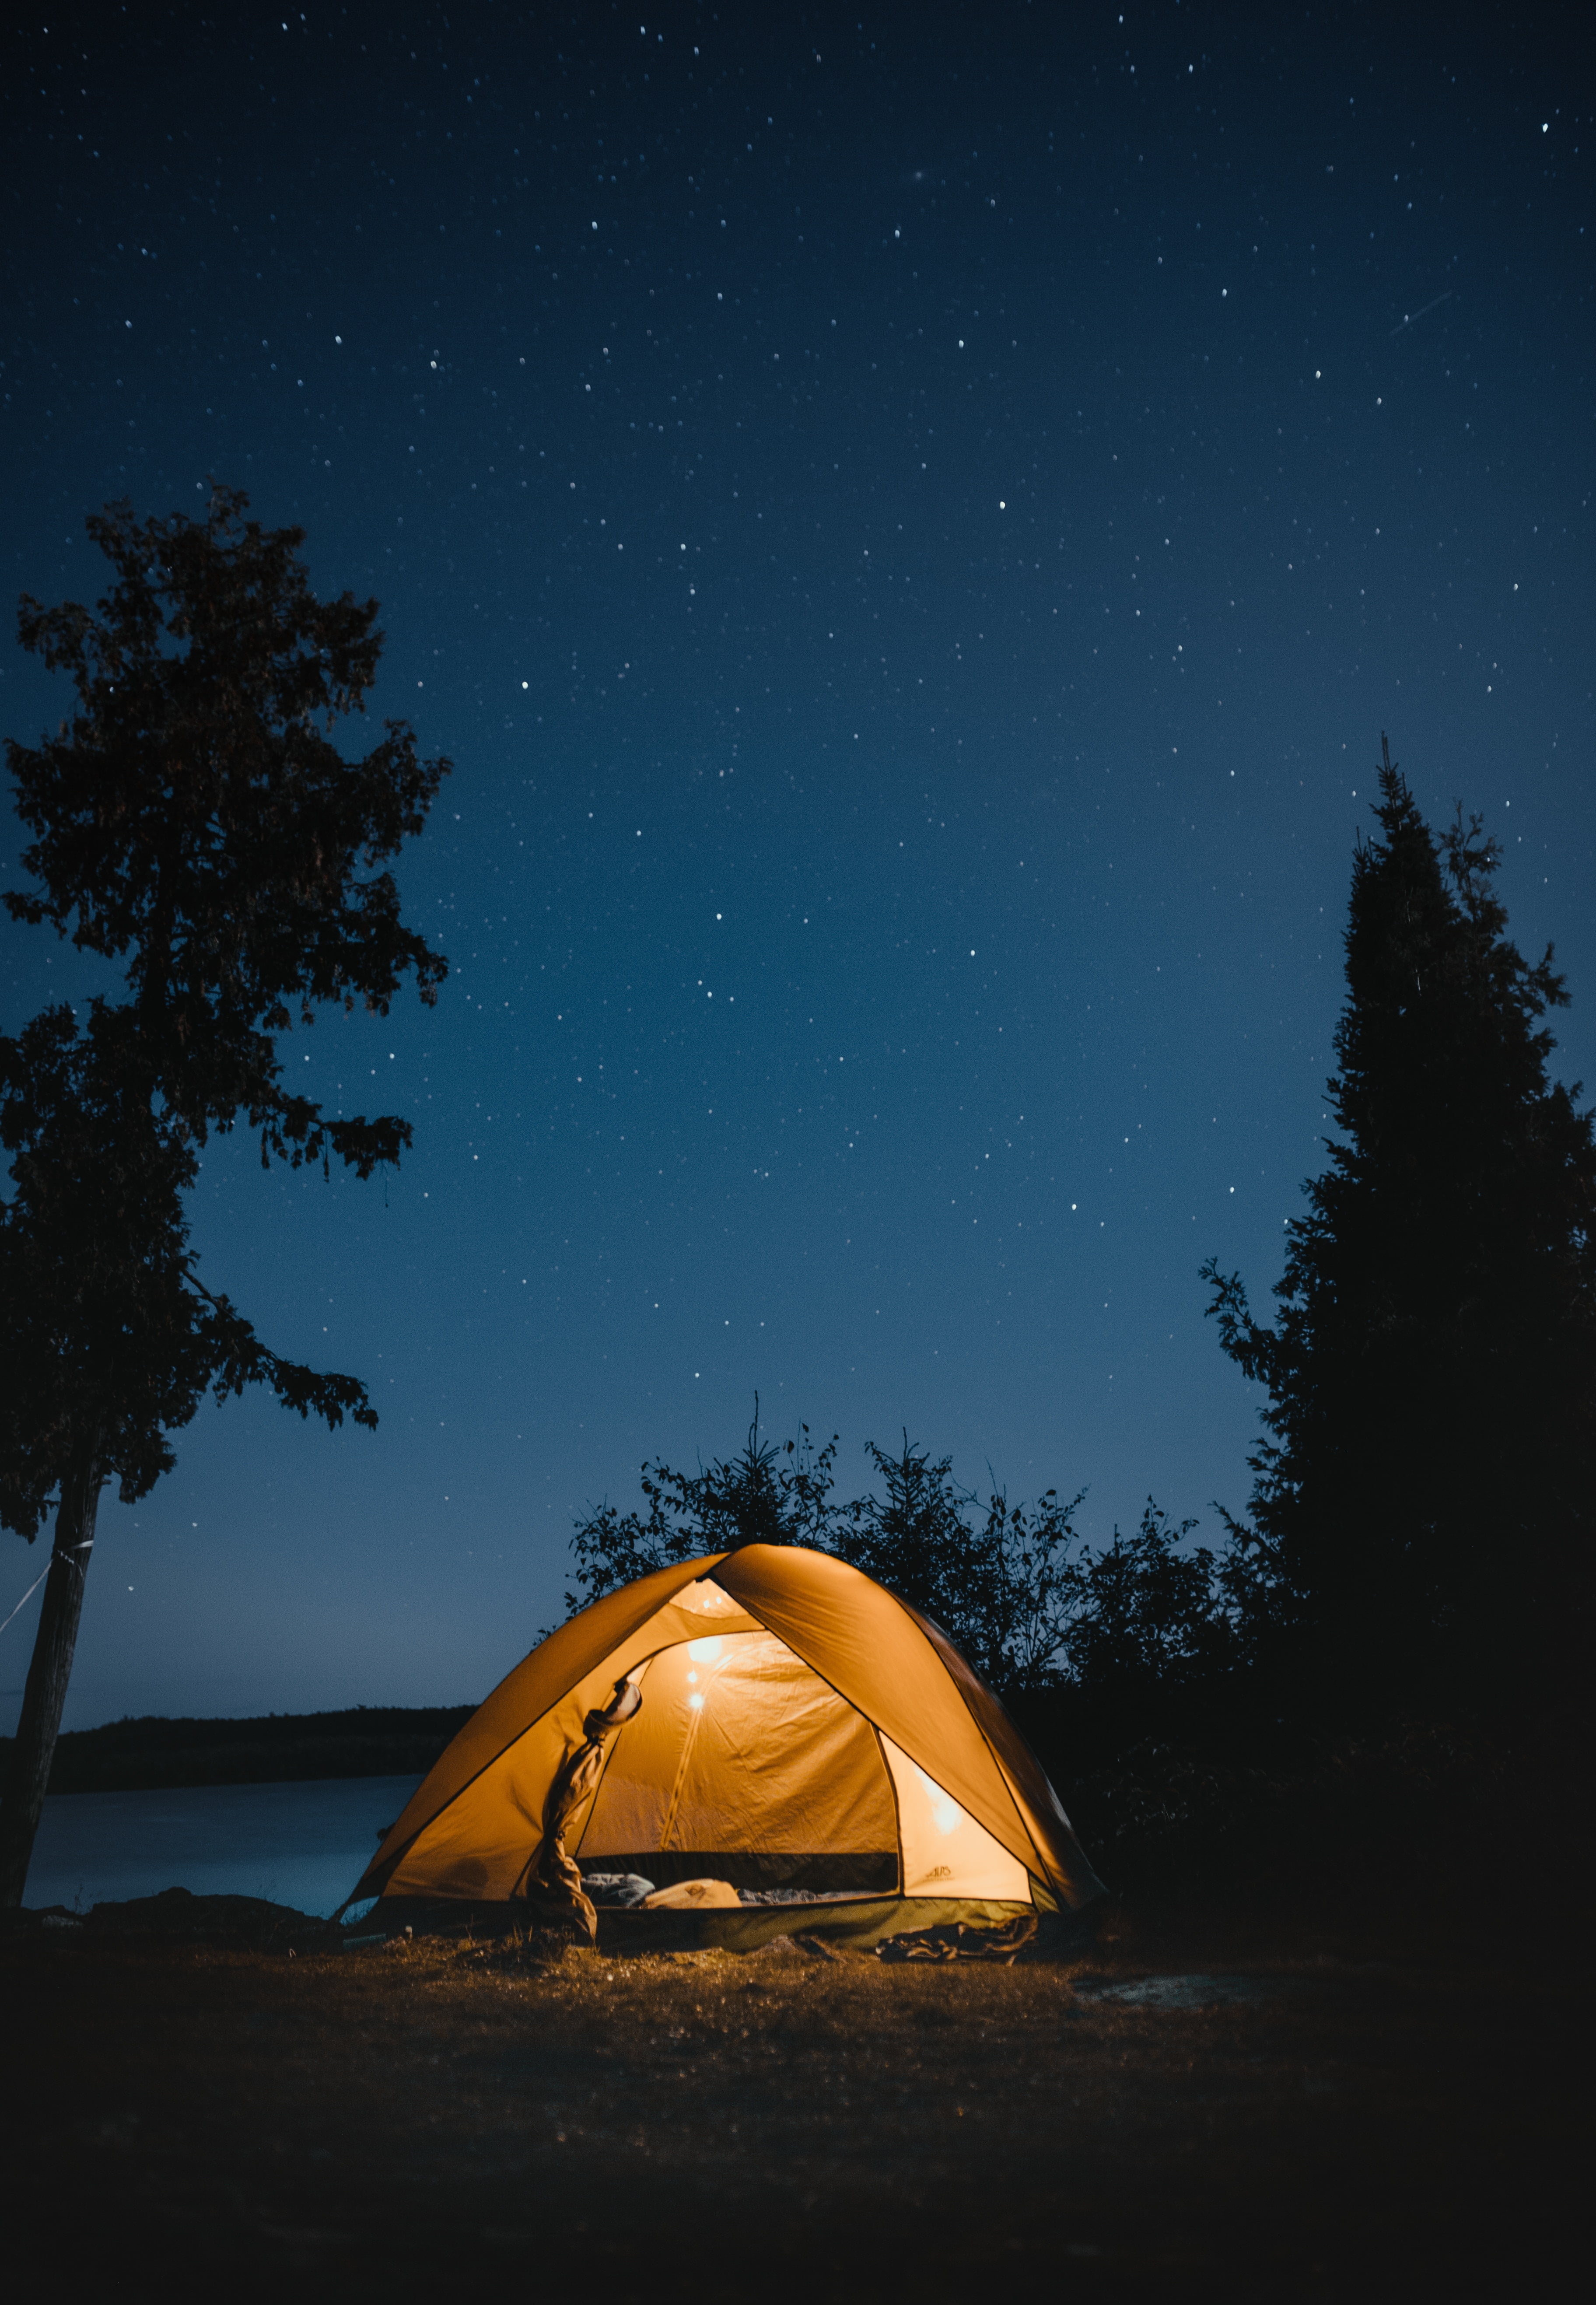 tent, night, camping, starry sky, travel, star - space, tree